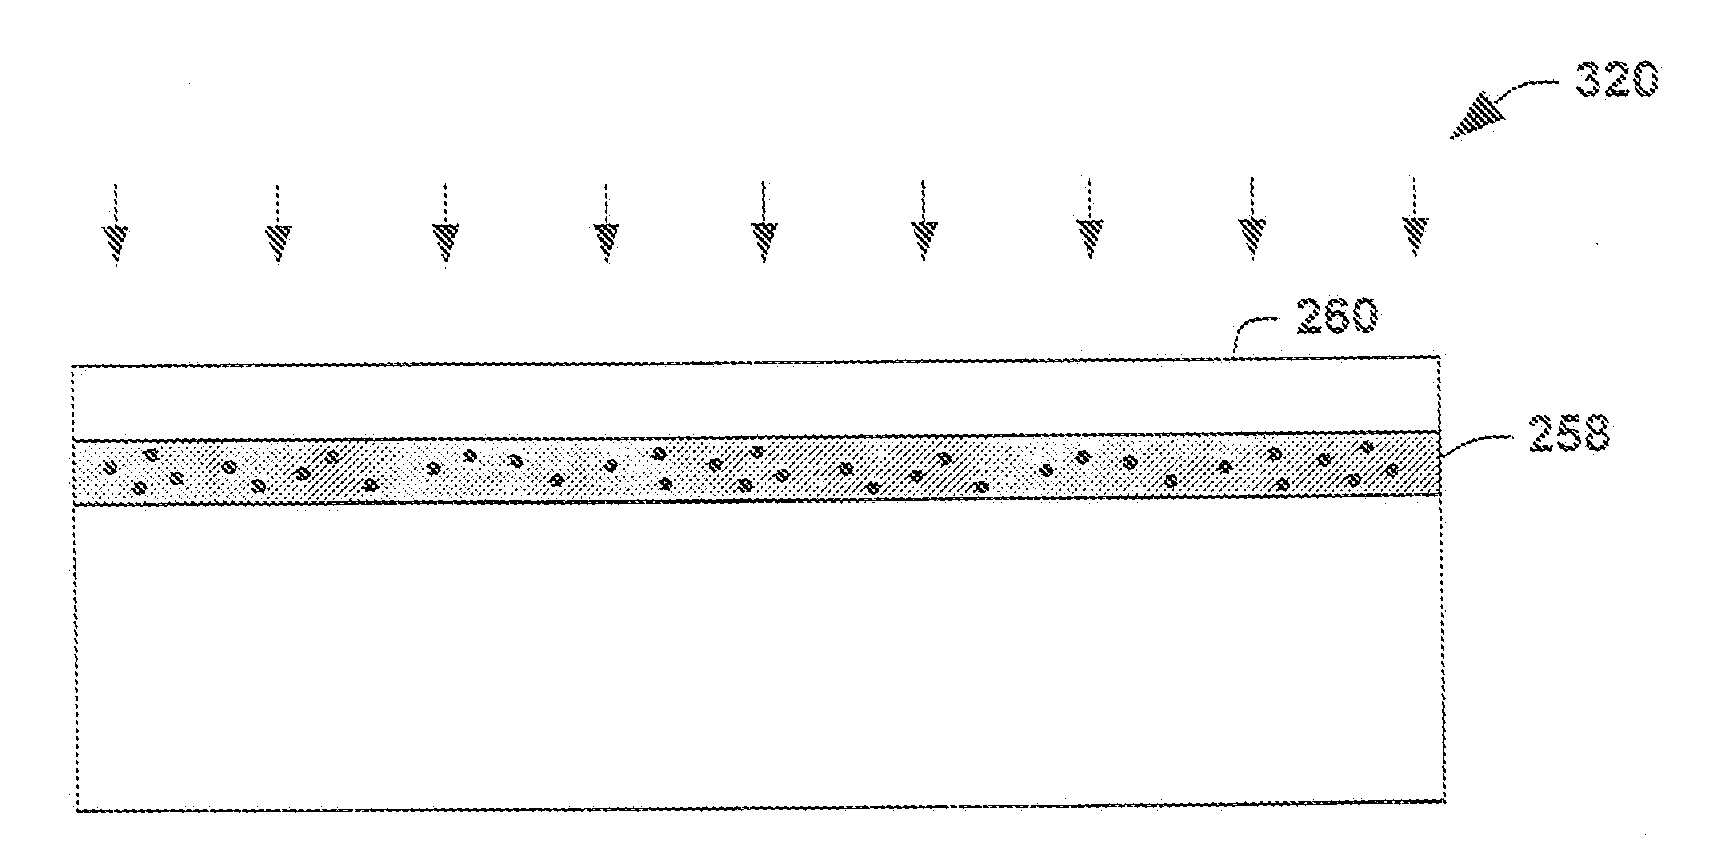 System and Method for Mitigating Oxide Growth in a Gate Dielectric